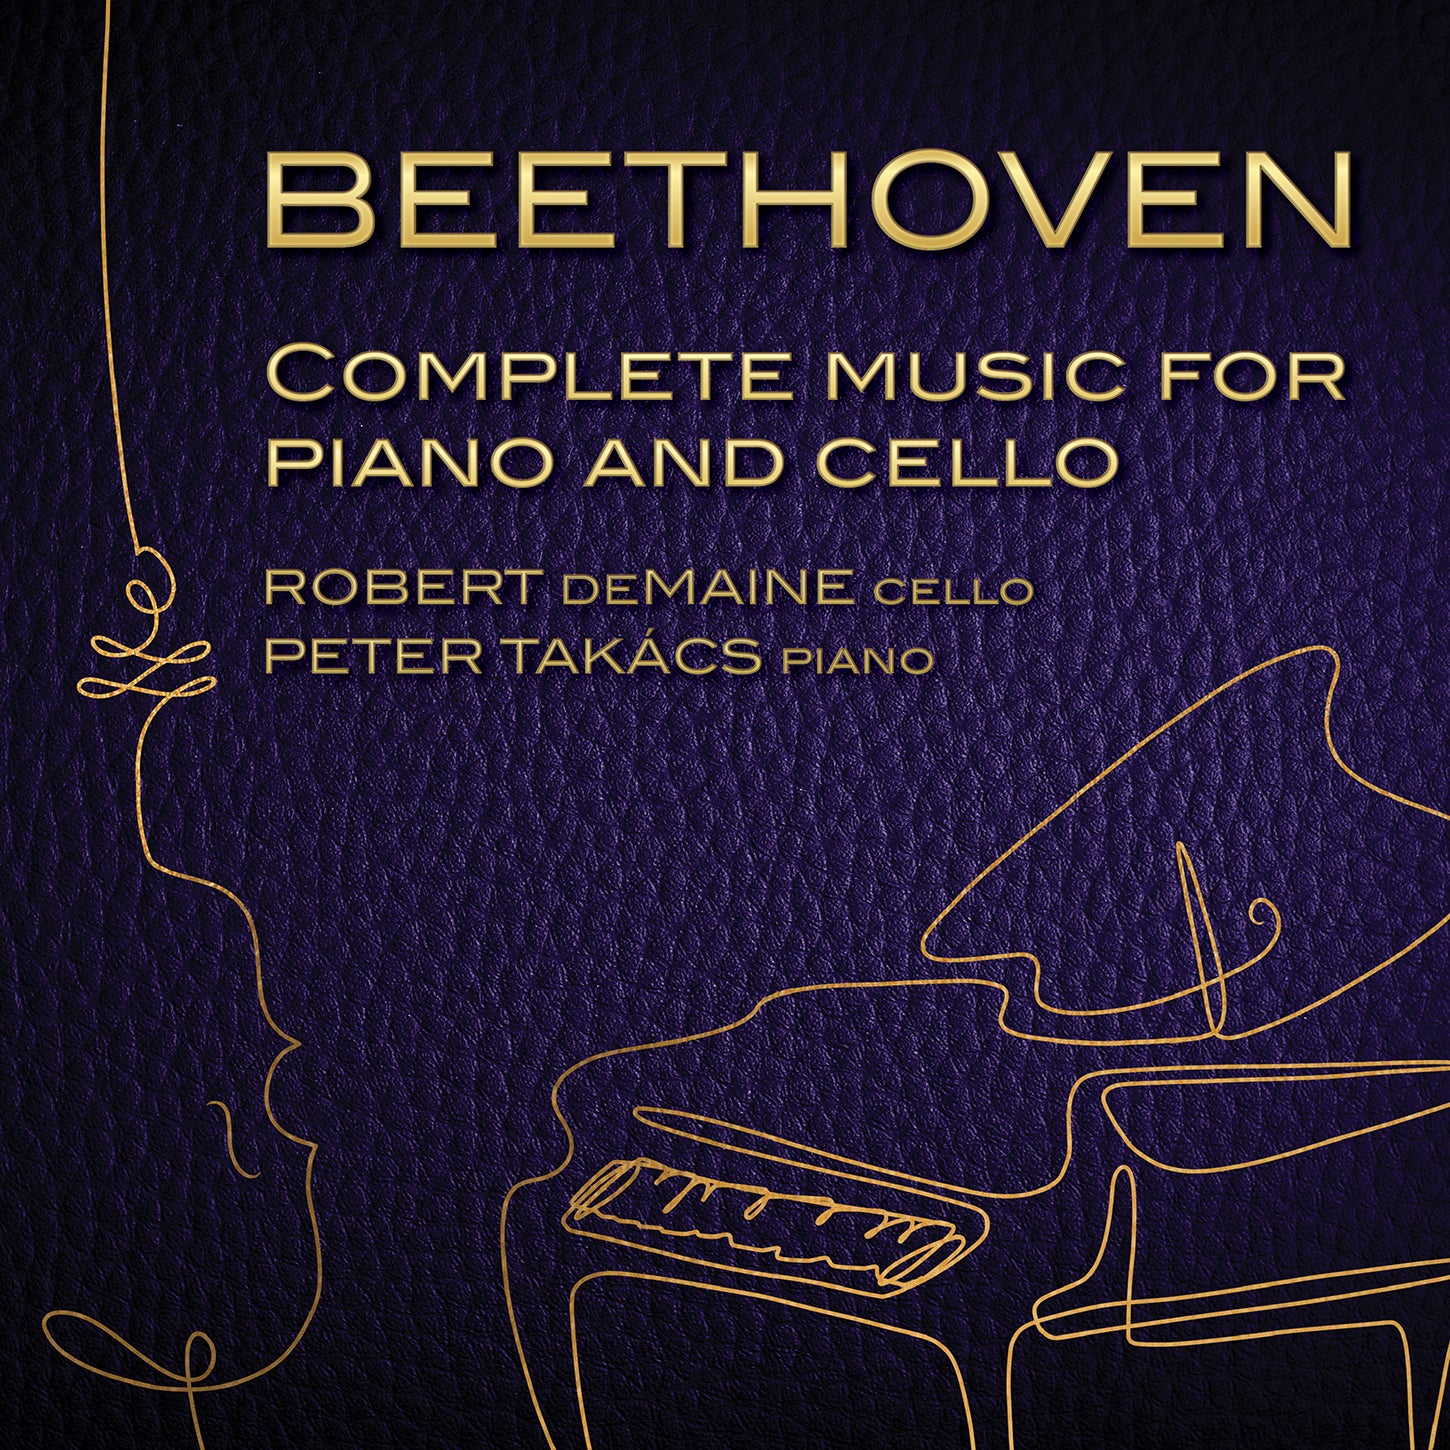 Beethoven: Complete Music for Cello & Piano / DeMaine, Takács